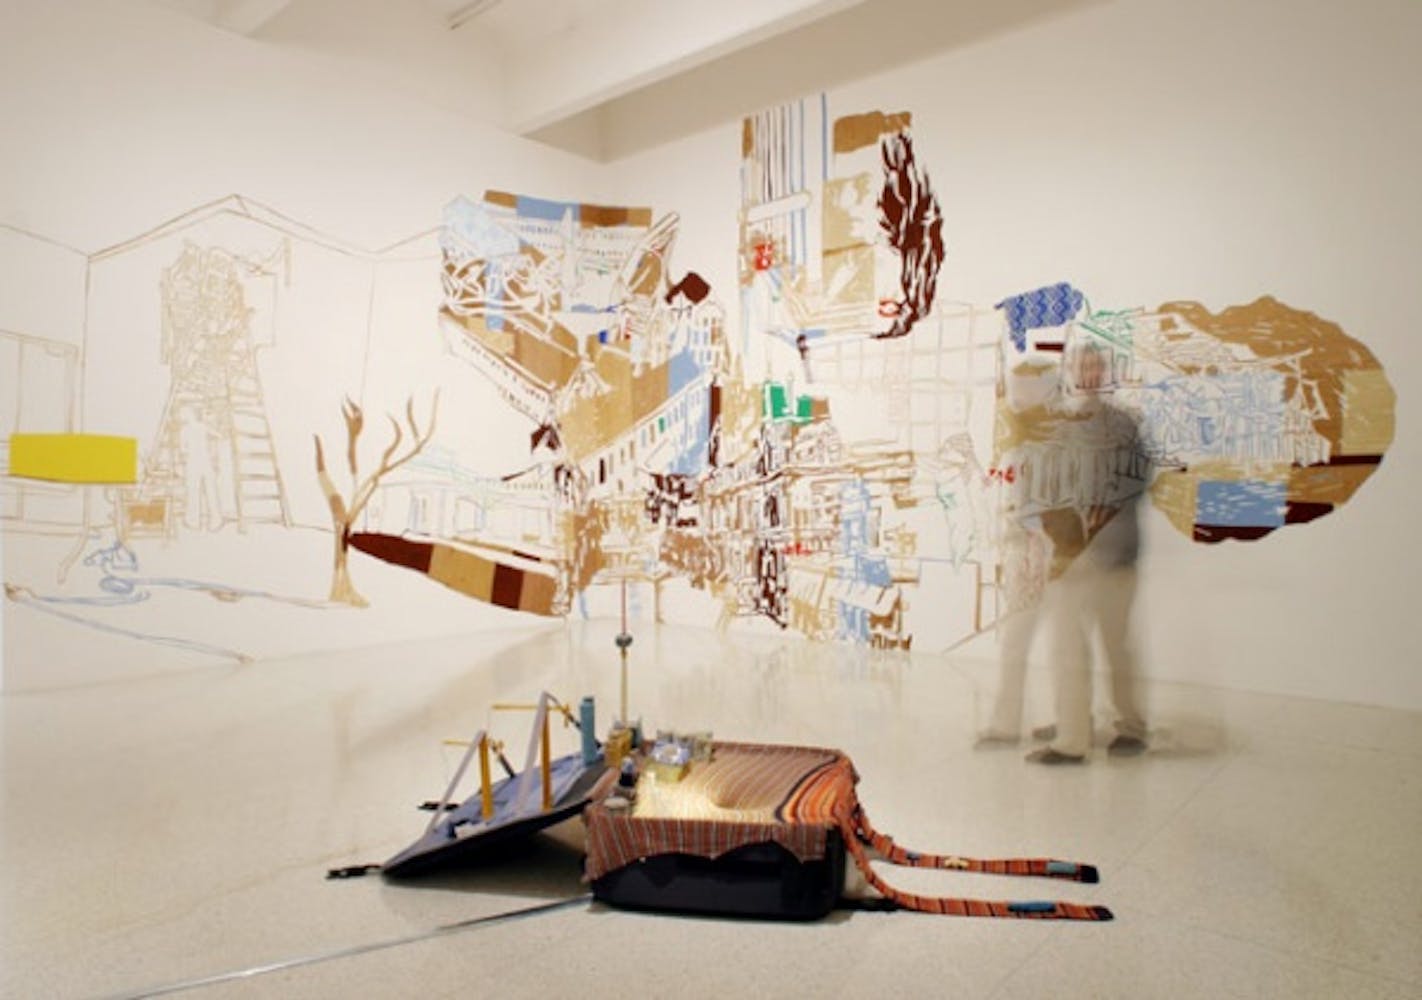 Installation view of How Latitudes Become Forms: Art in a Global Age, 2003